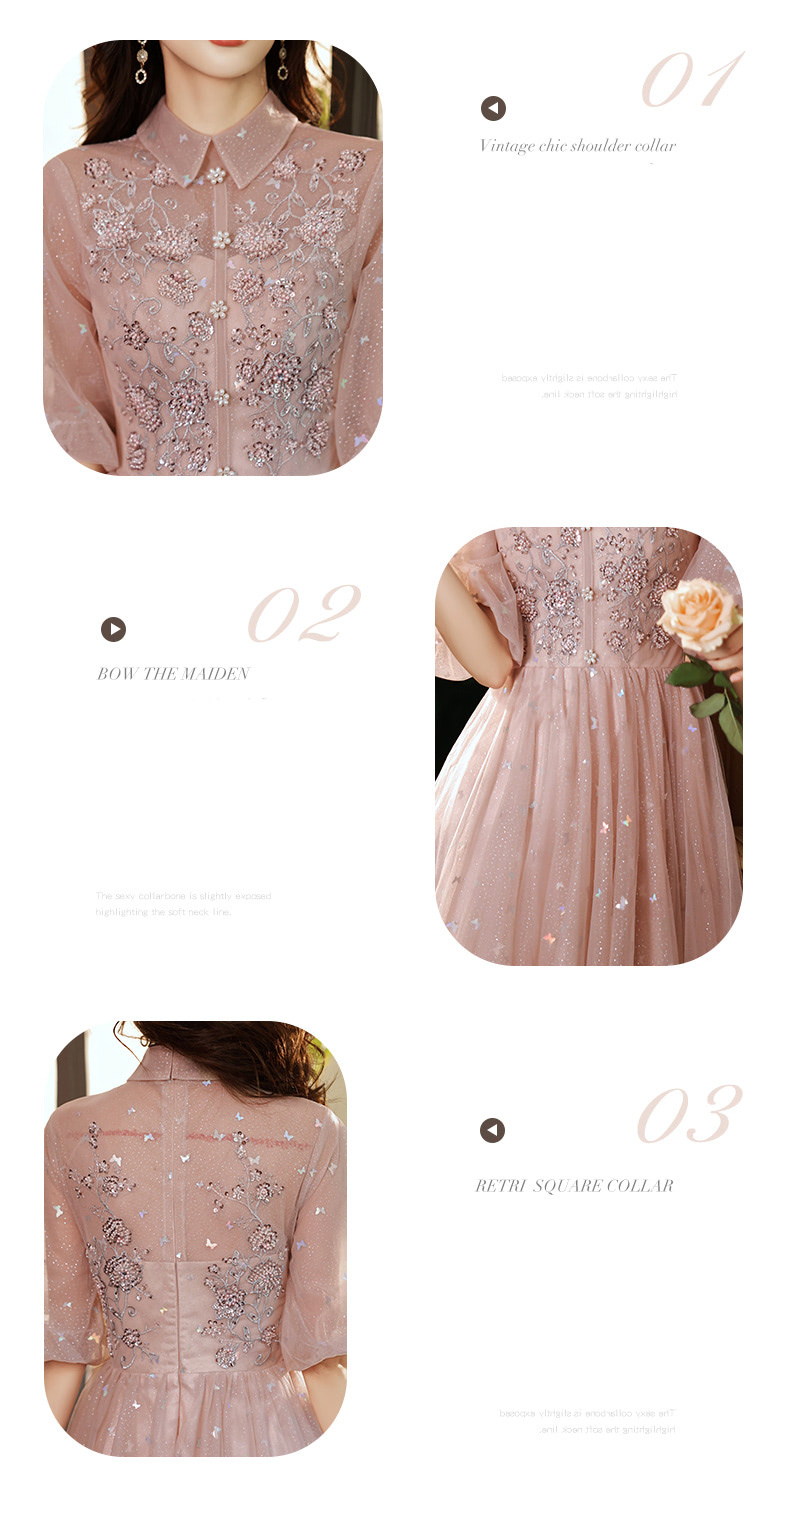 Vintage-Chic-Pink-Prom-Dress-Flora-Embroidery-Formal-Ball-Gown10.jpg